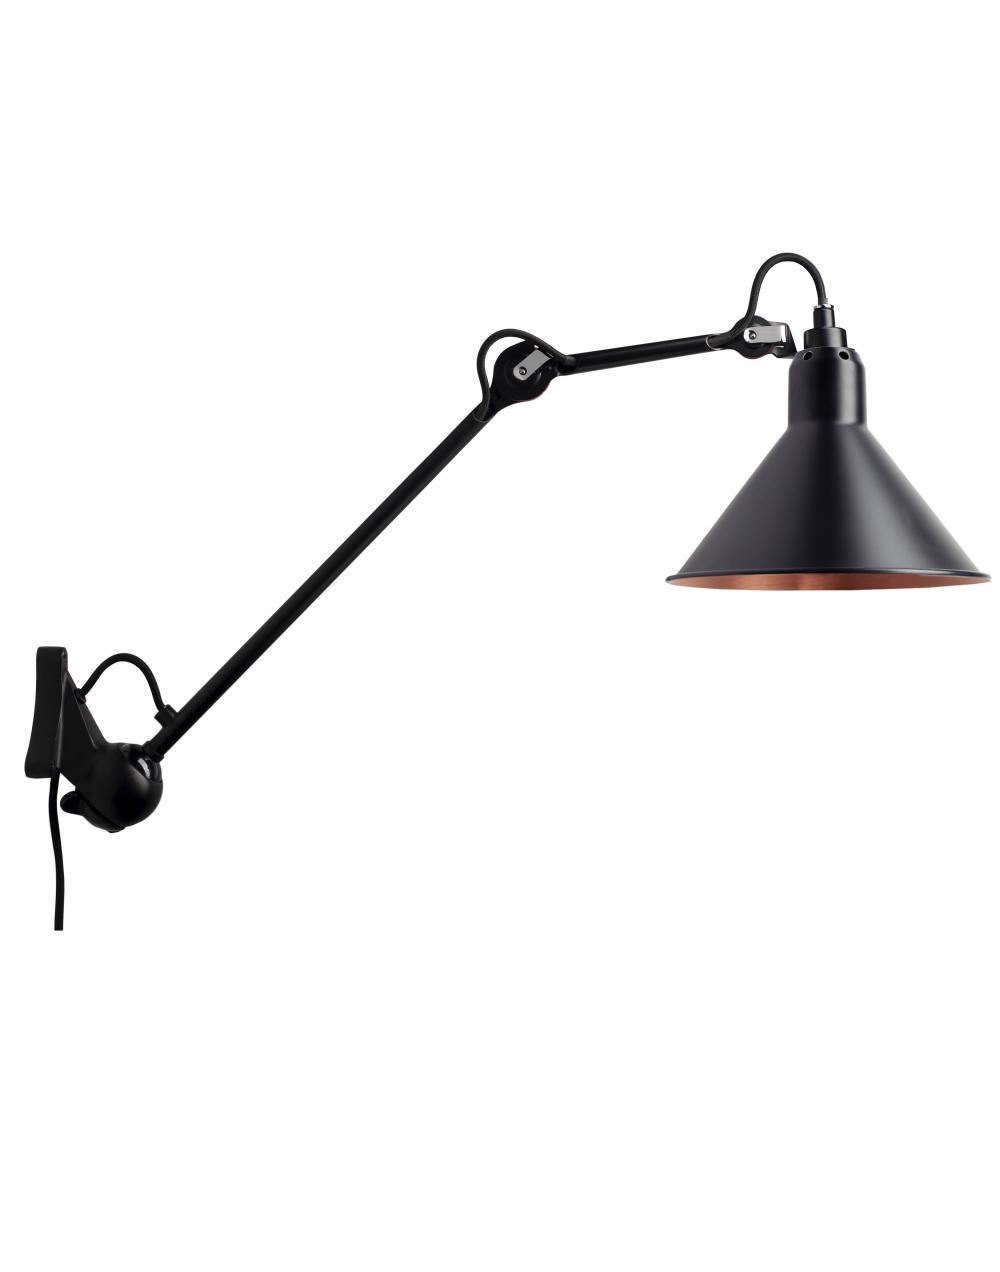 Lampe Gras 222 Wall Light Black Arm Black Shade With Copper Interior Conic Shade